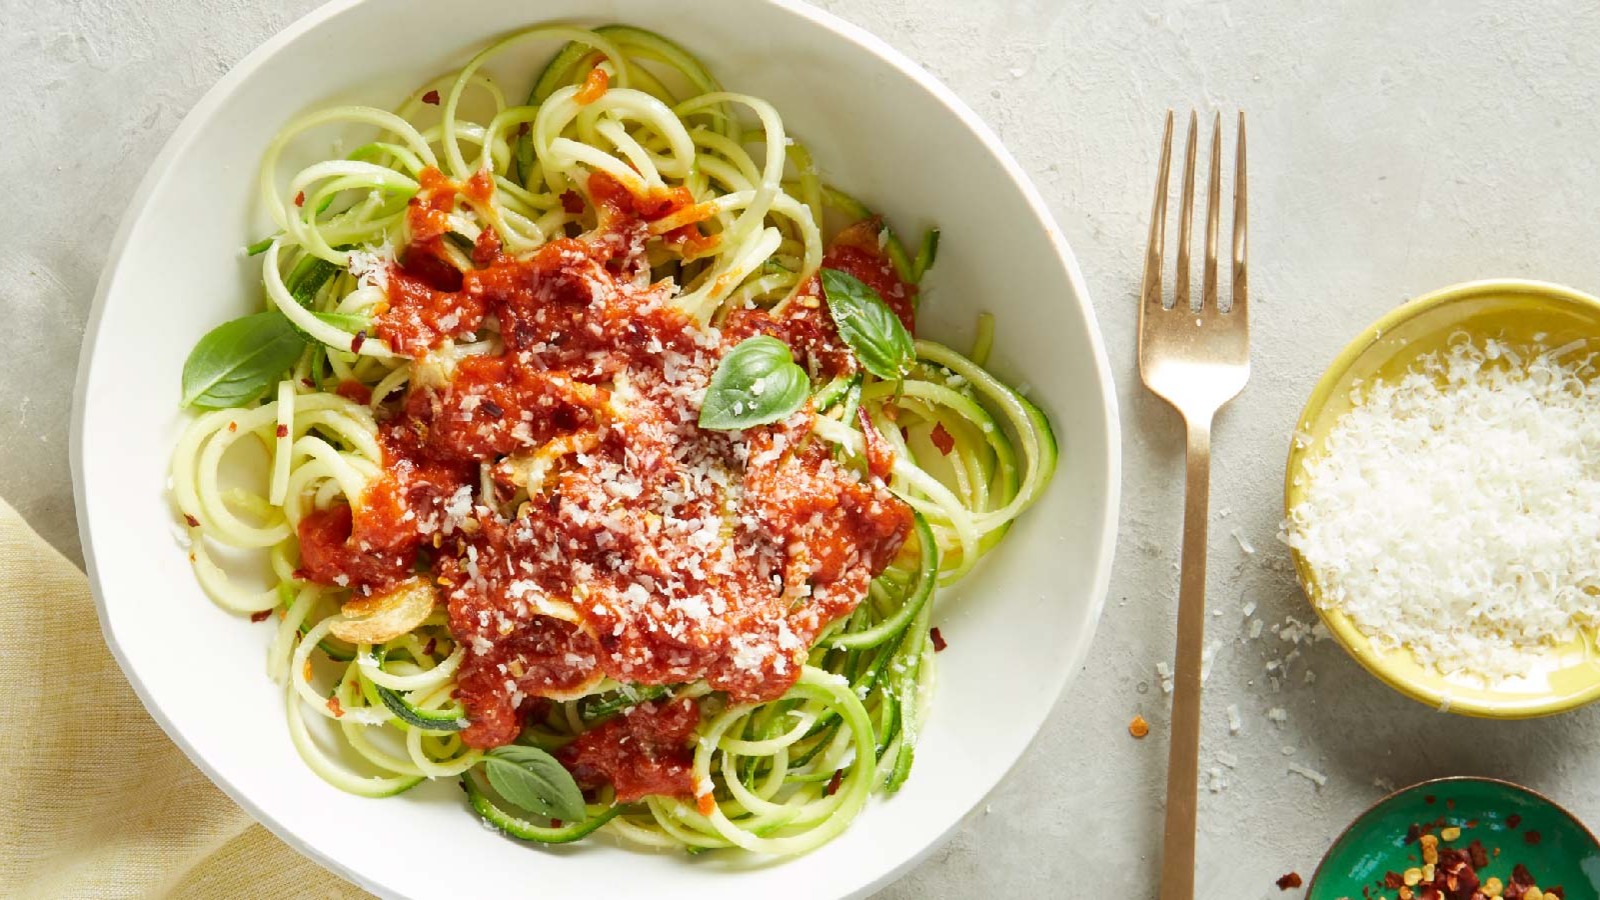 Image of Zucchini Noodles with Vodka Sauce